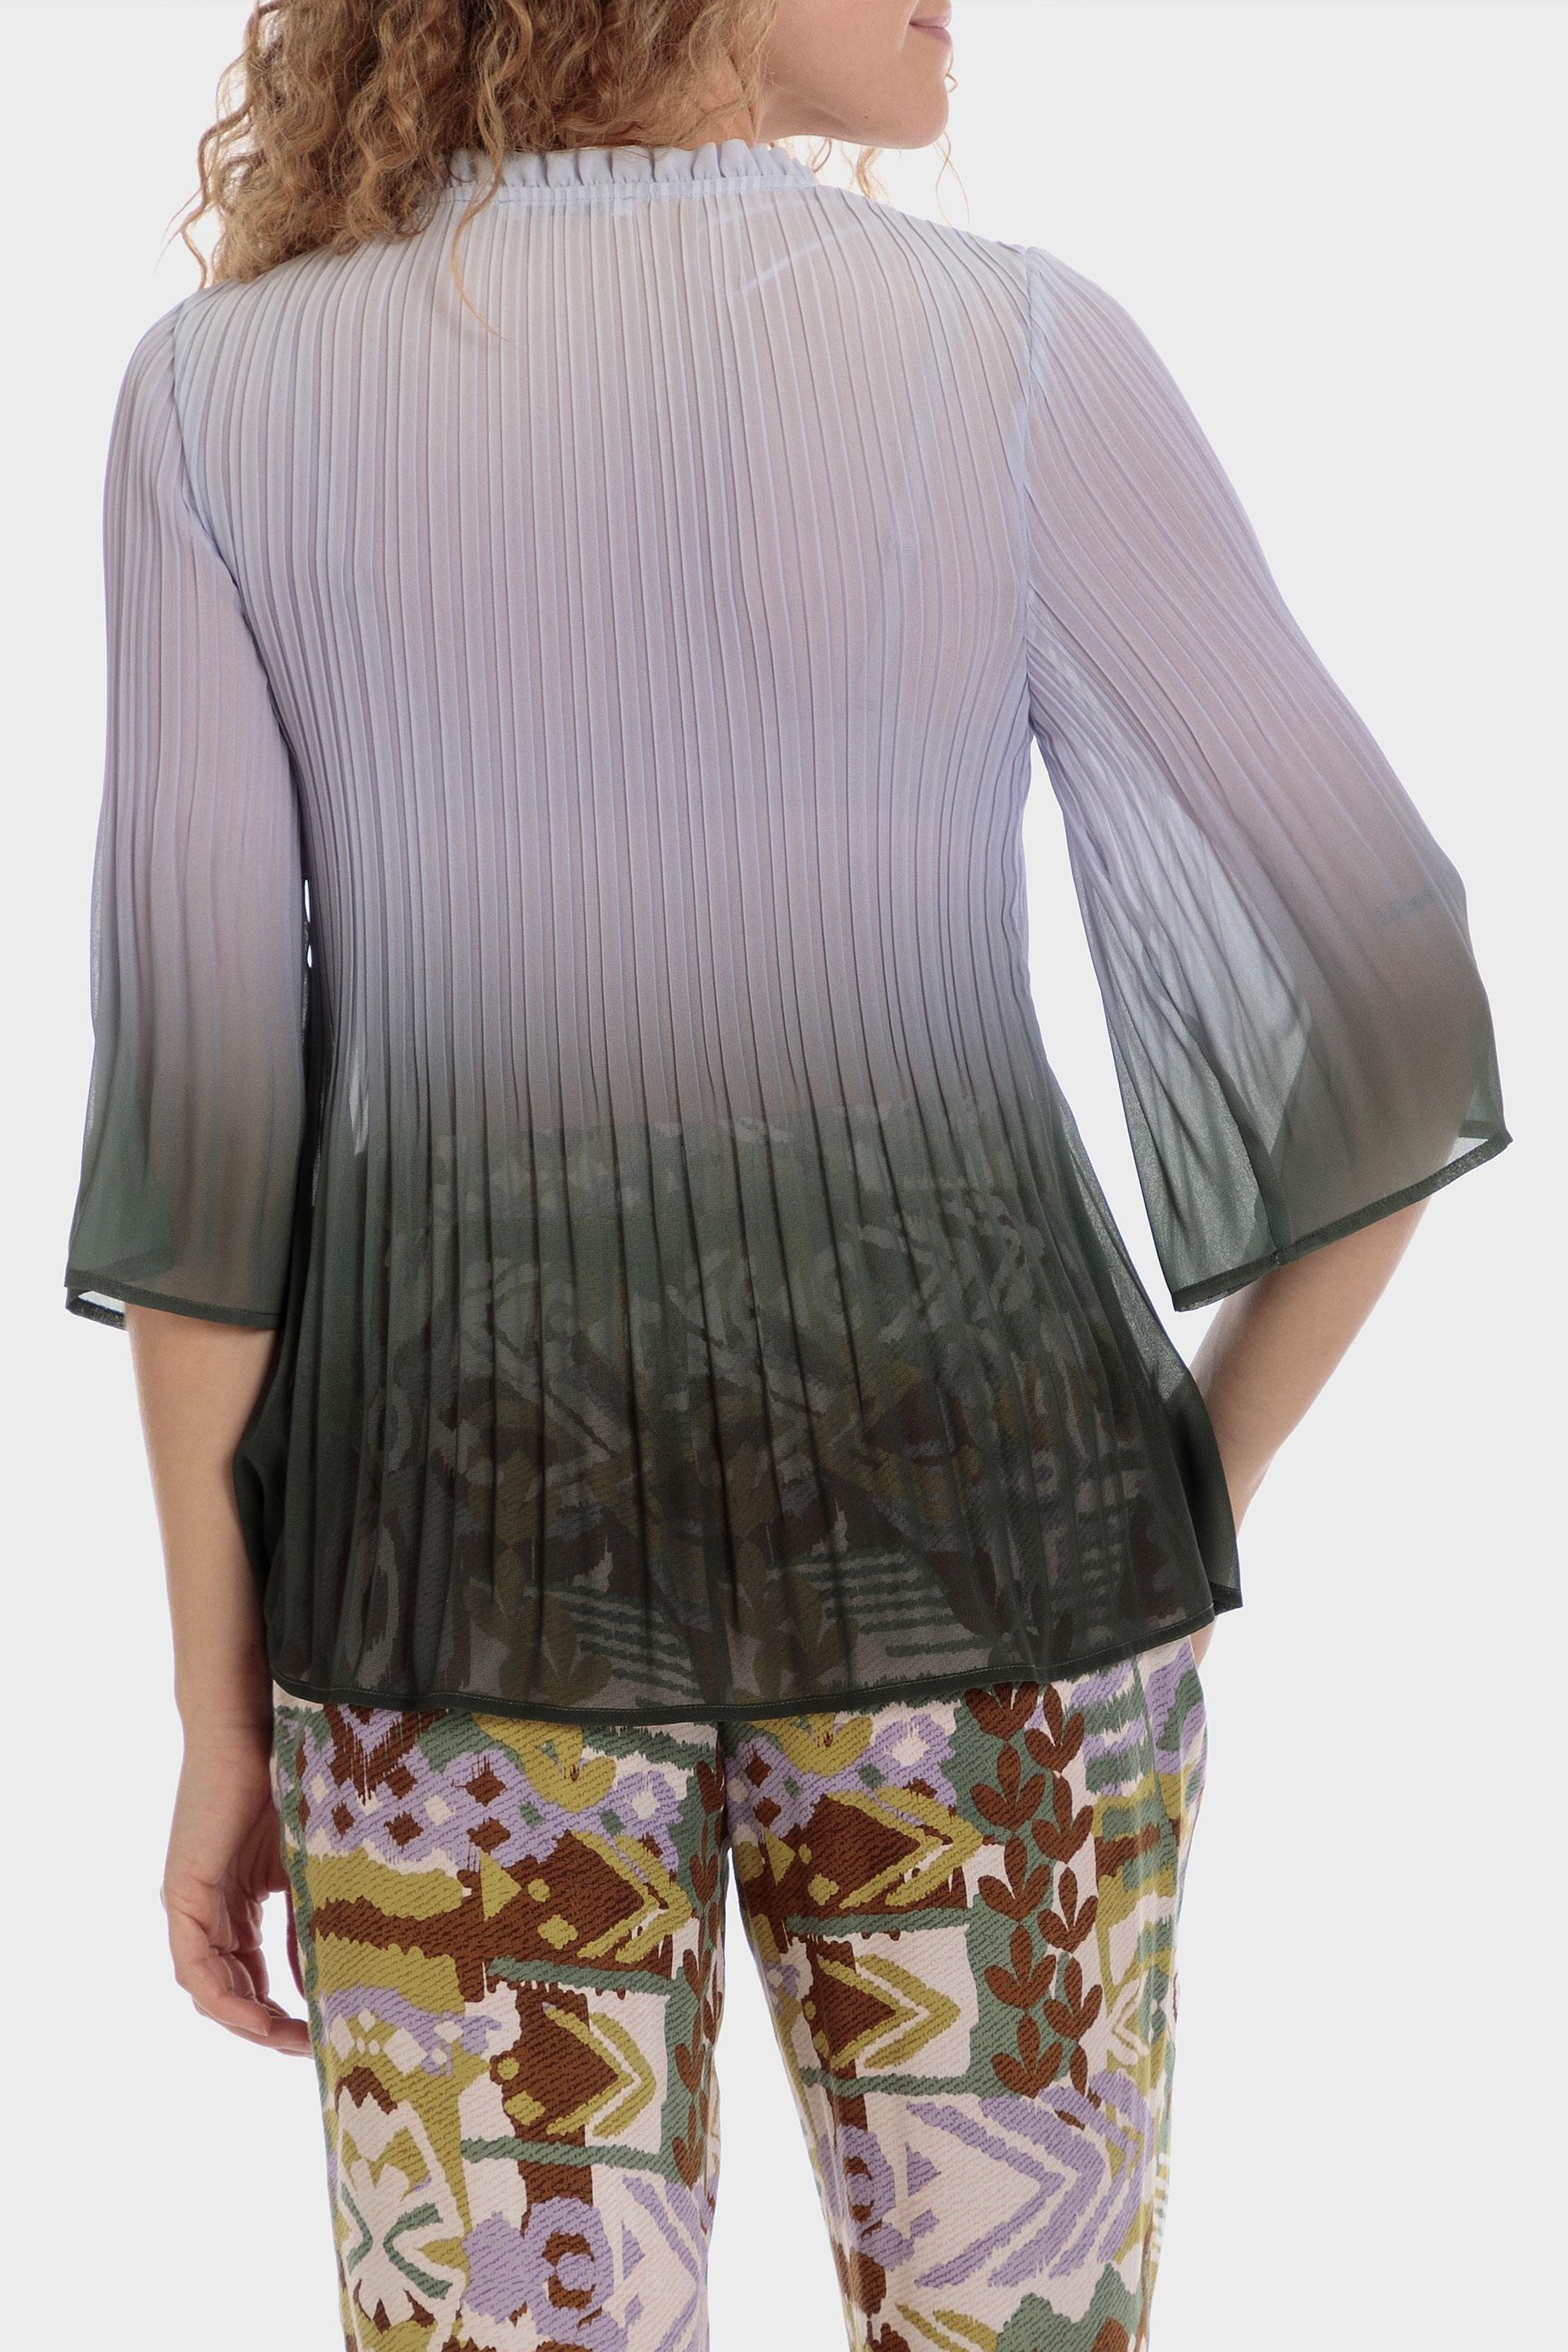 Punt Roma - Grey Pleated Blouse